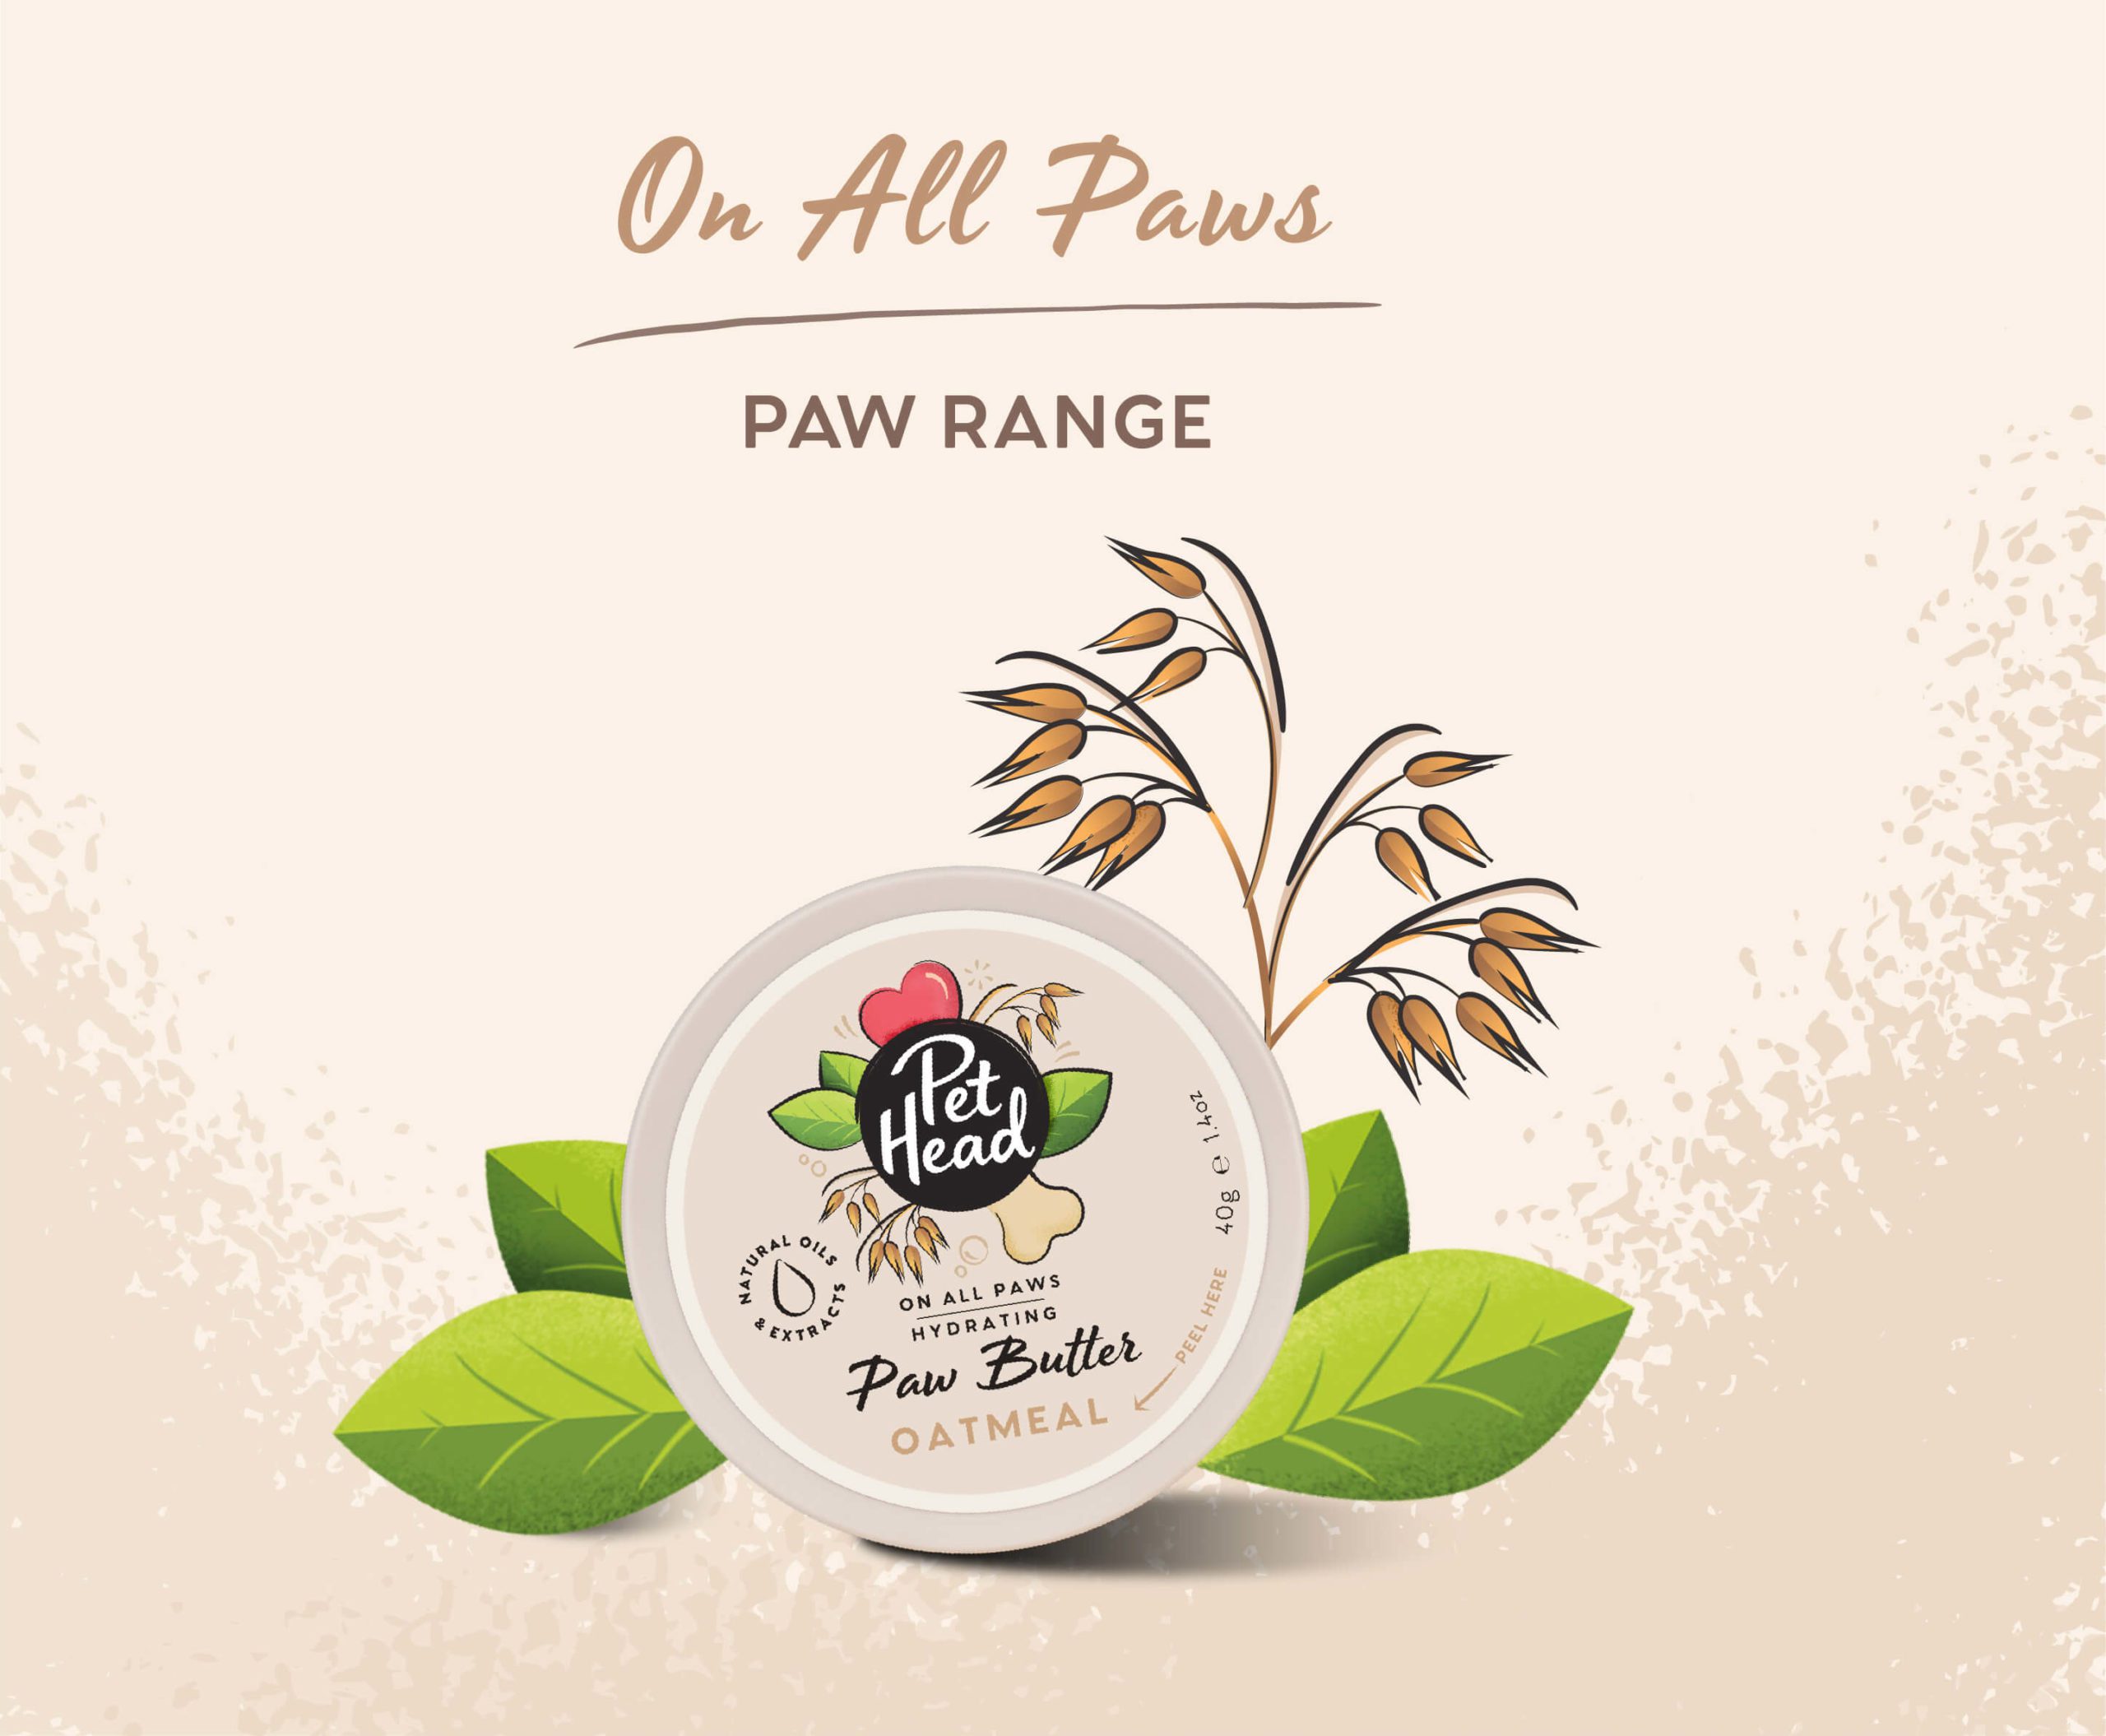 On all Paws range Paw Butter tub lid image